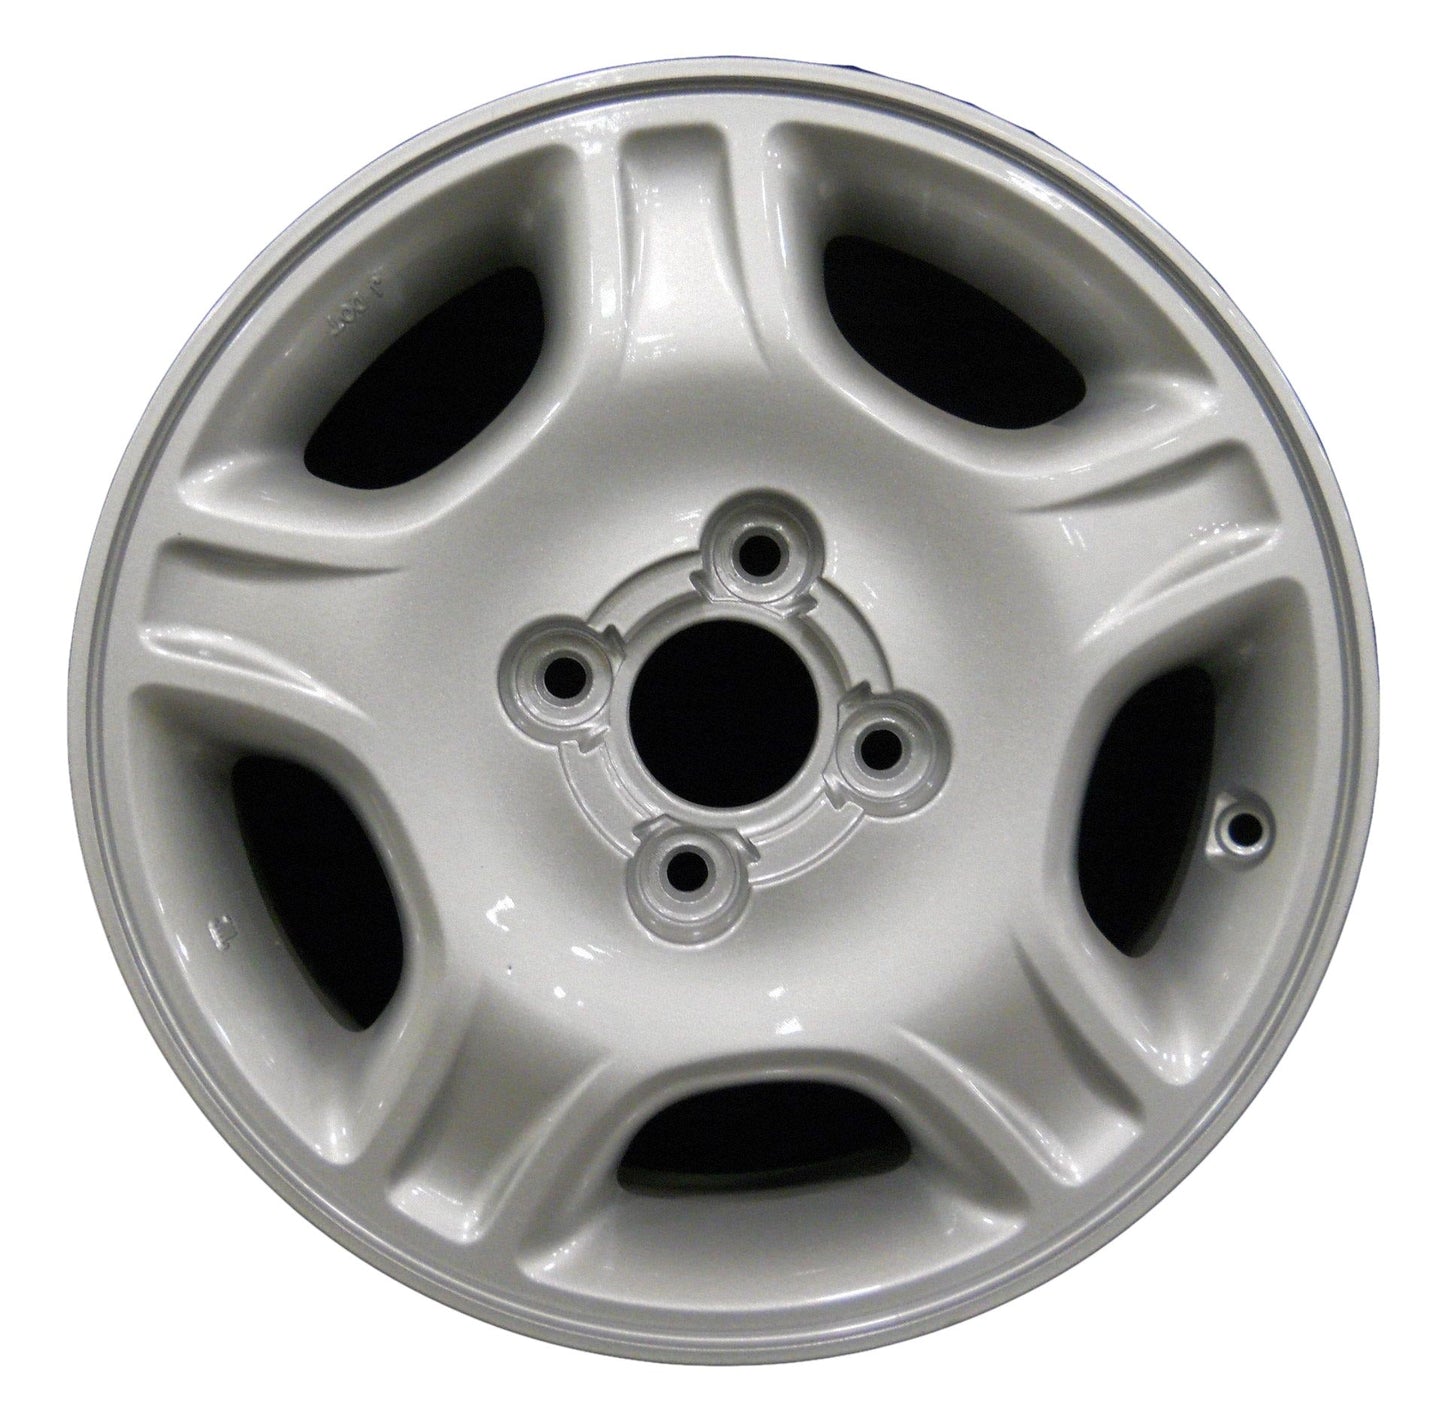 Nissan Altima  2000, 2001 Factory OEM Car Wheel Size 16x6 Alloy WAO.62382.PS09.FF